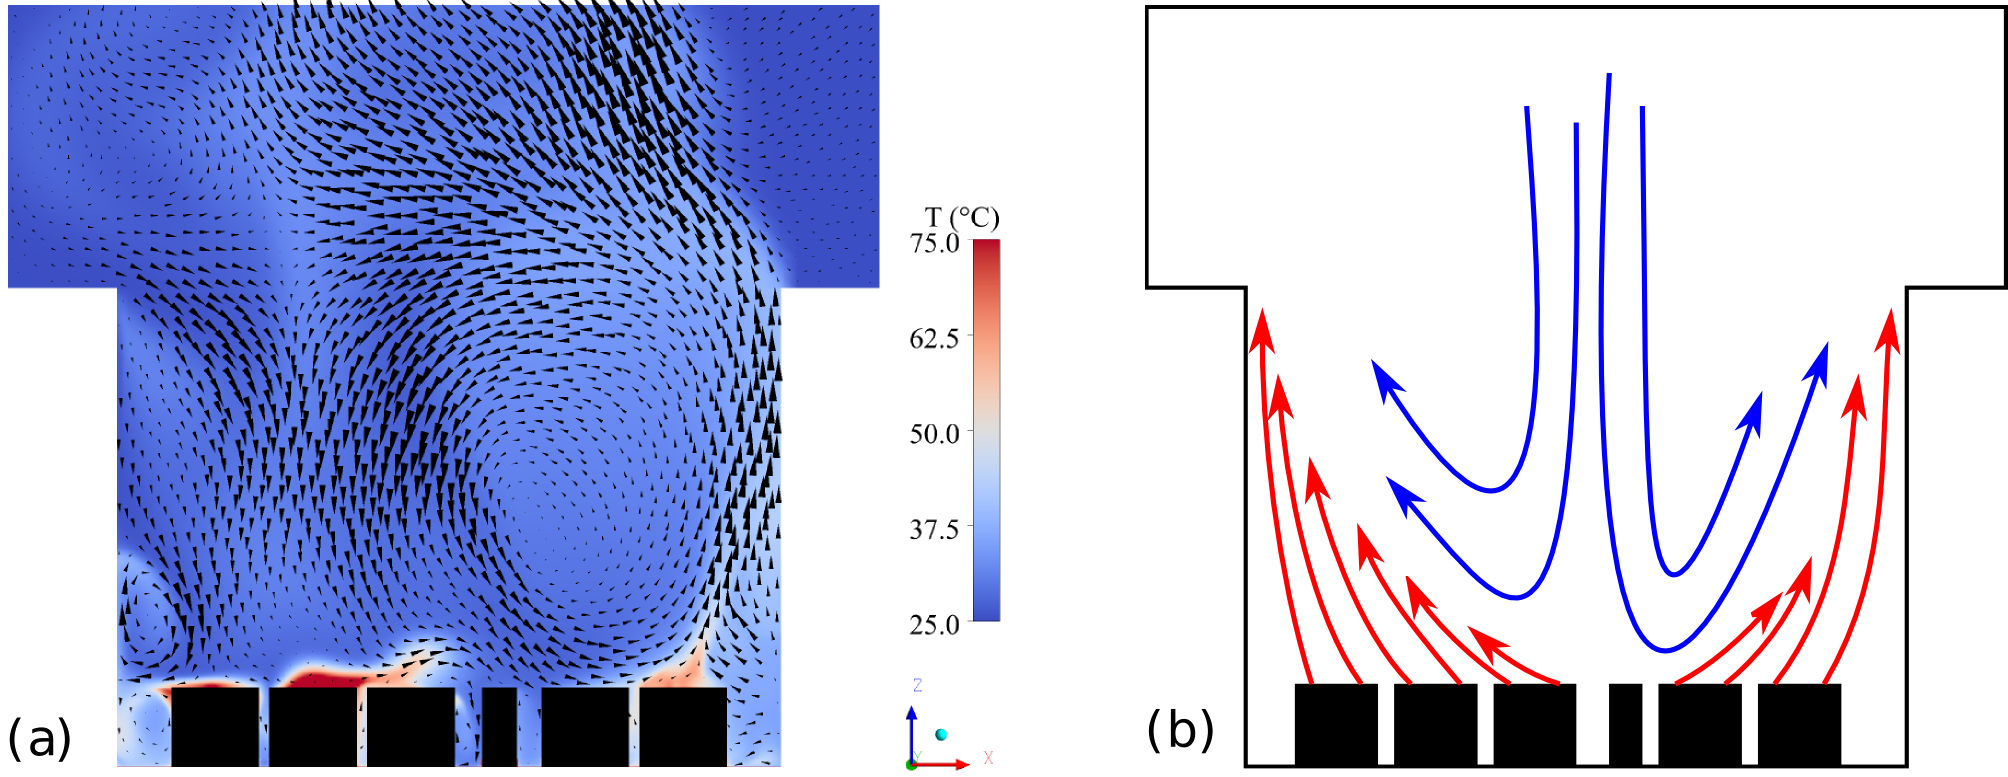 (a) Snapshot of the temperature and velocity field in a vertical plane through the pool center; (b) Illustration of the prevailing flow characteristic in the pool atmosphere. ©Copyright: Lehnigk, Ronald